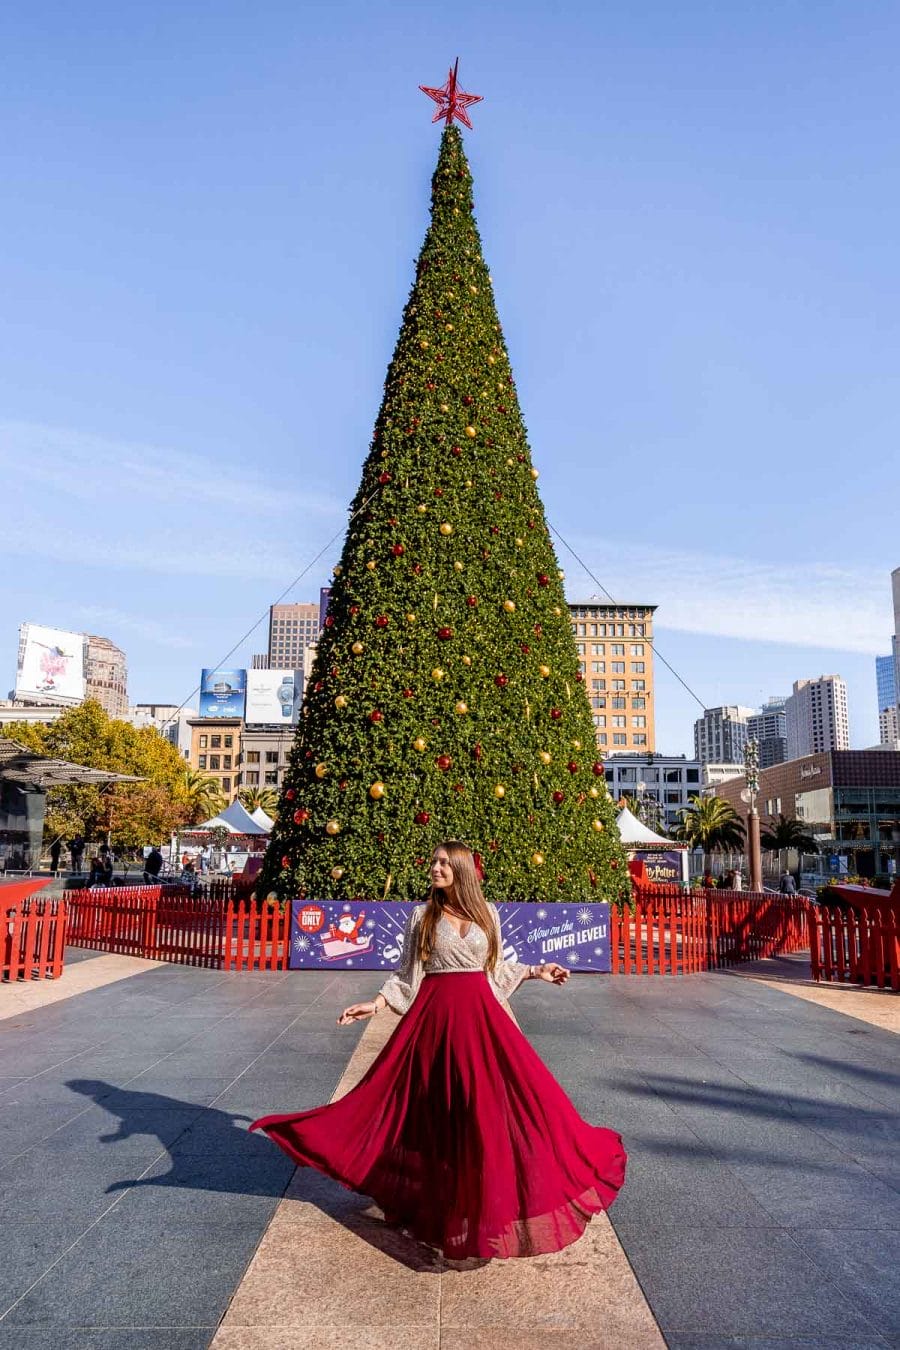 Girl in red skirt in front of a Christmas tree at Union Square, San Francisco